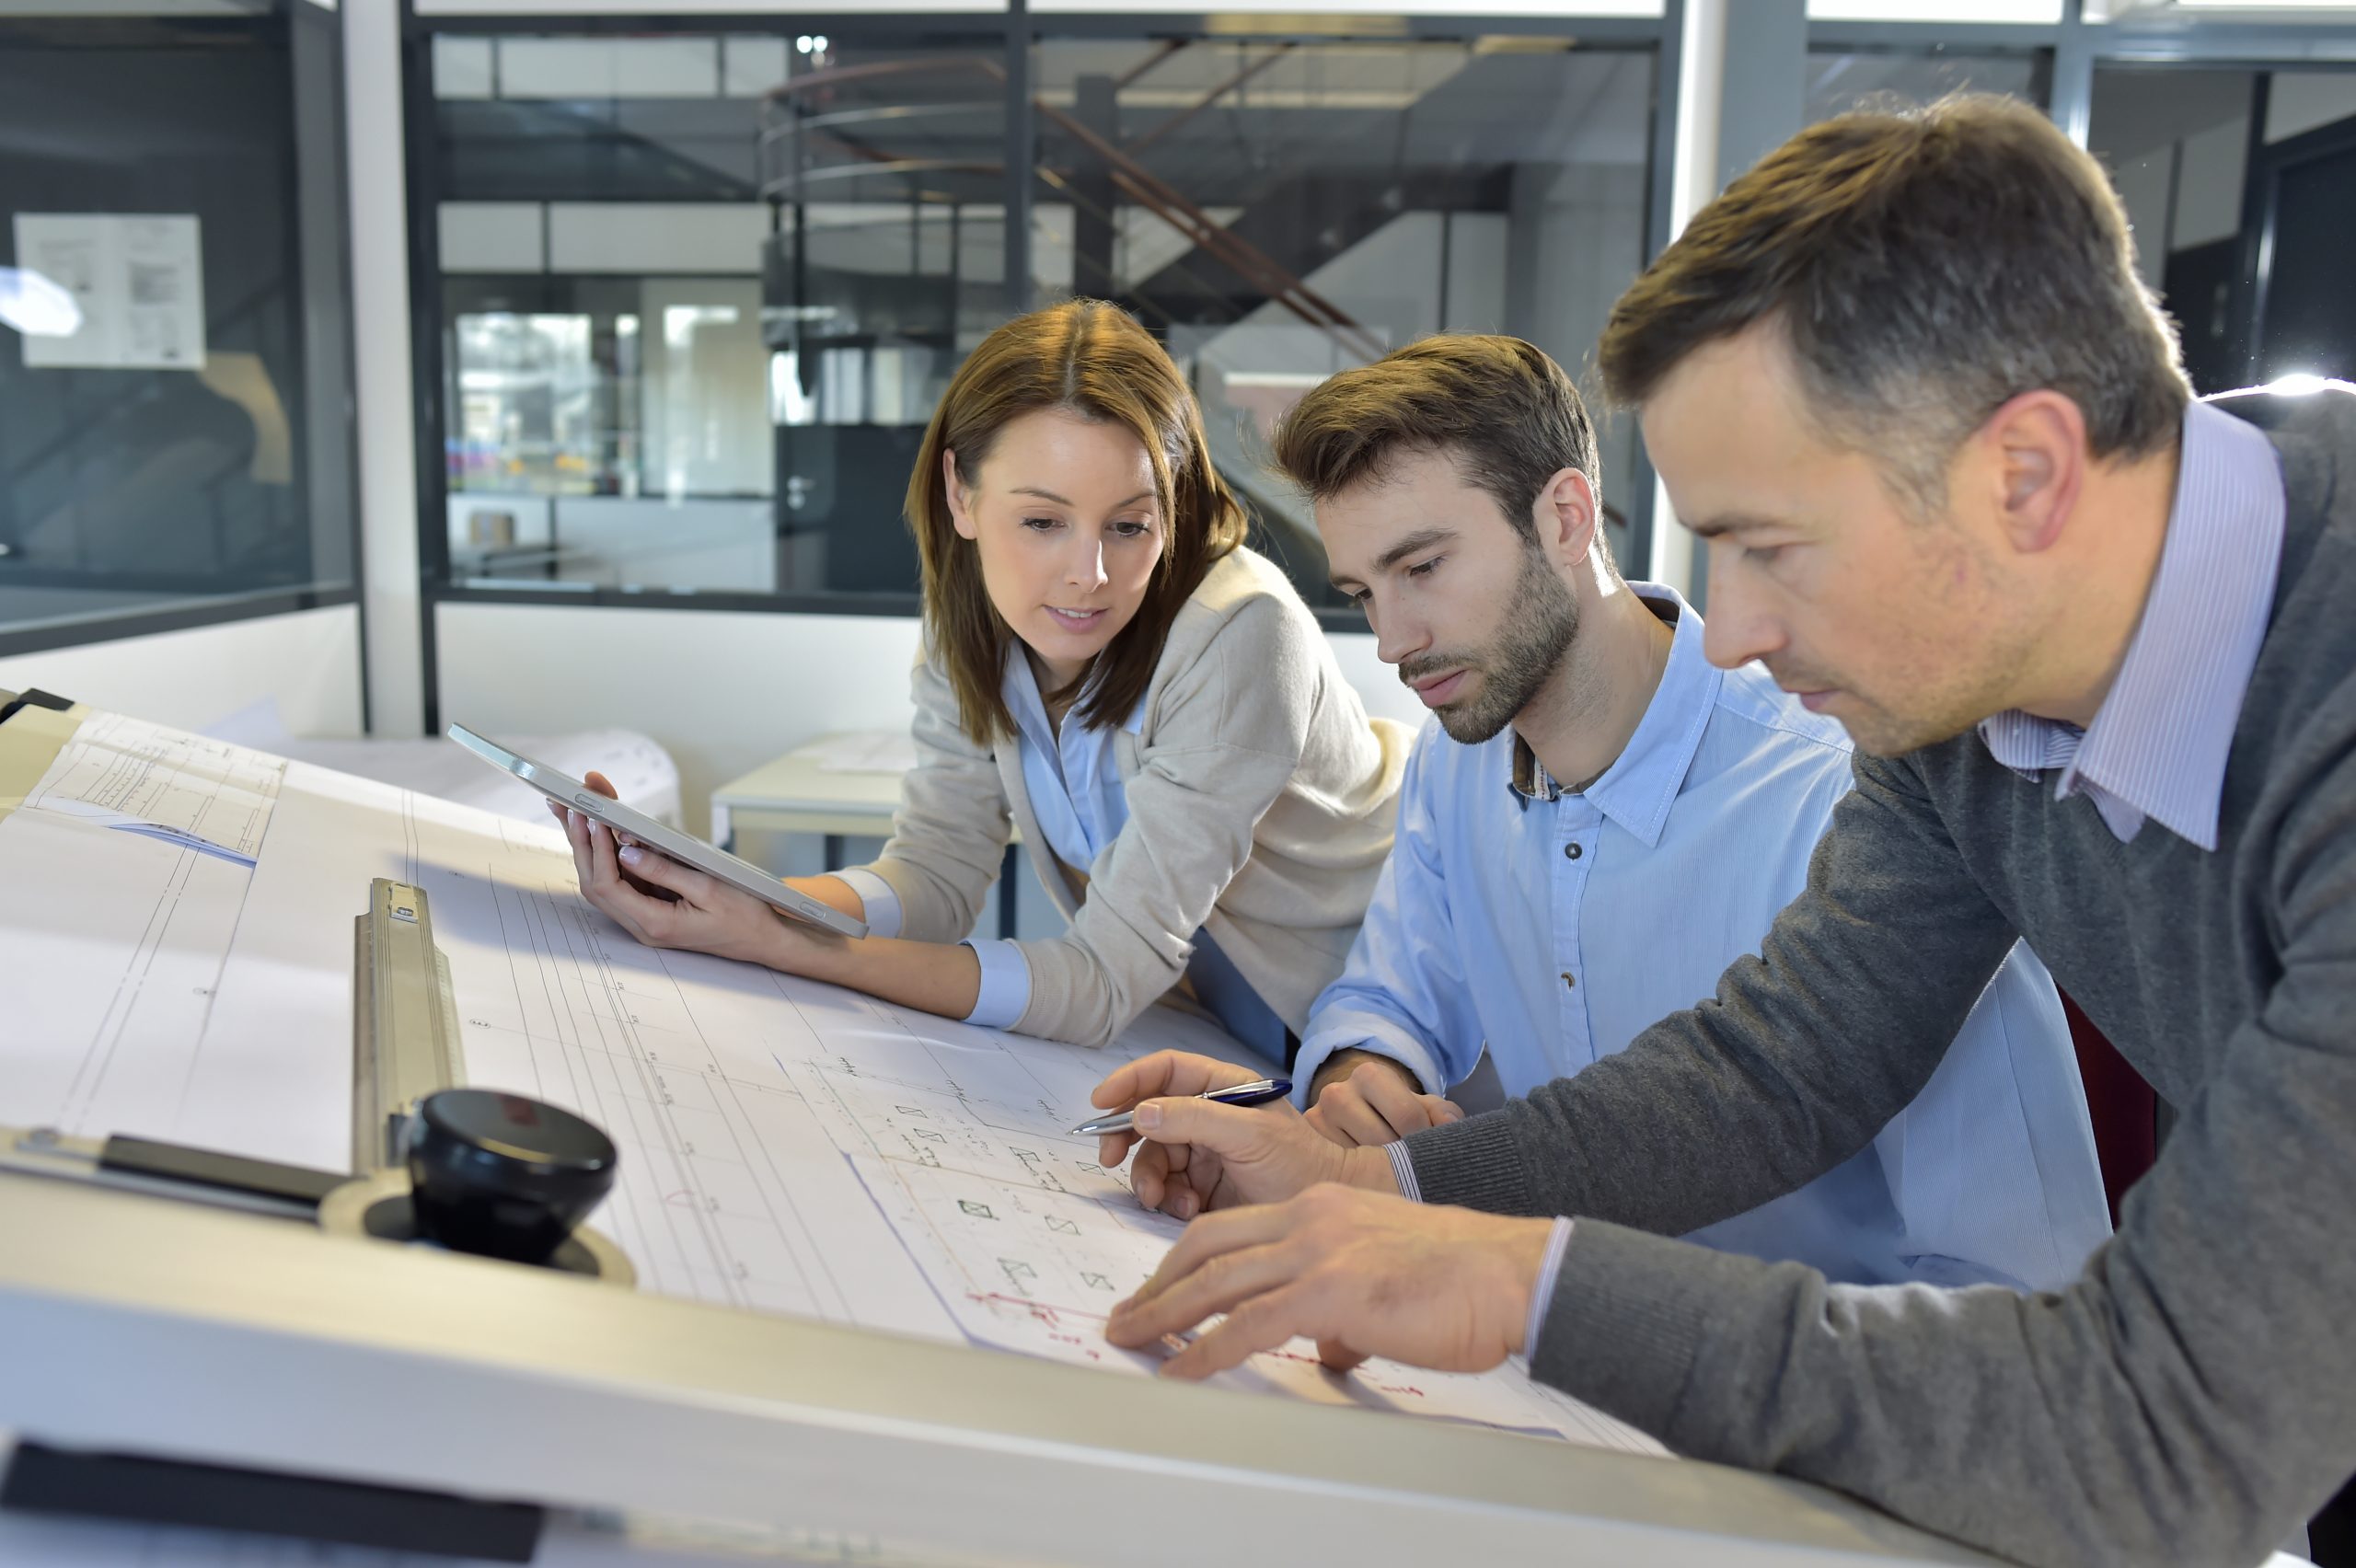 A group of people in an office, analyzing blueprints for commercial flooring systems.